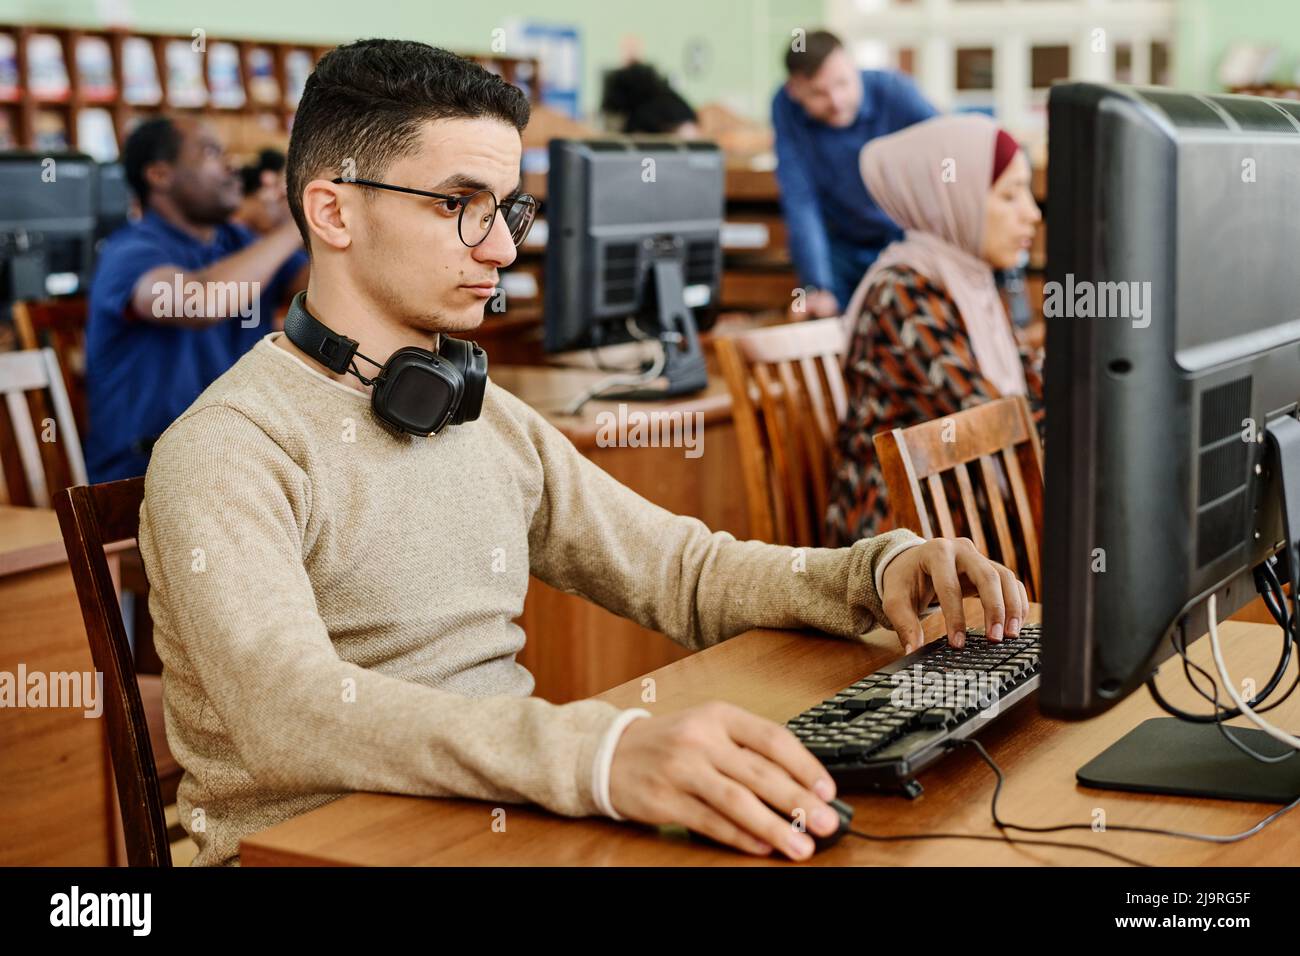 Group of ethnically diverse students sitting in modern university library working on computers Stock Photo